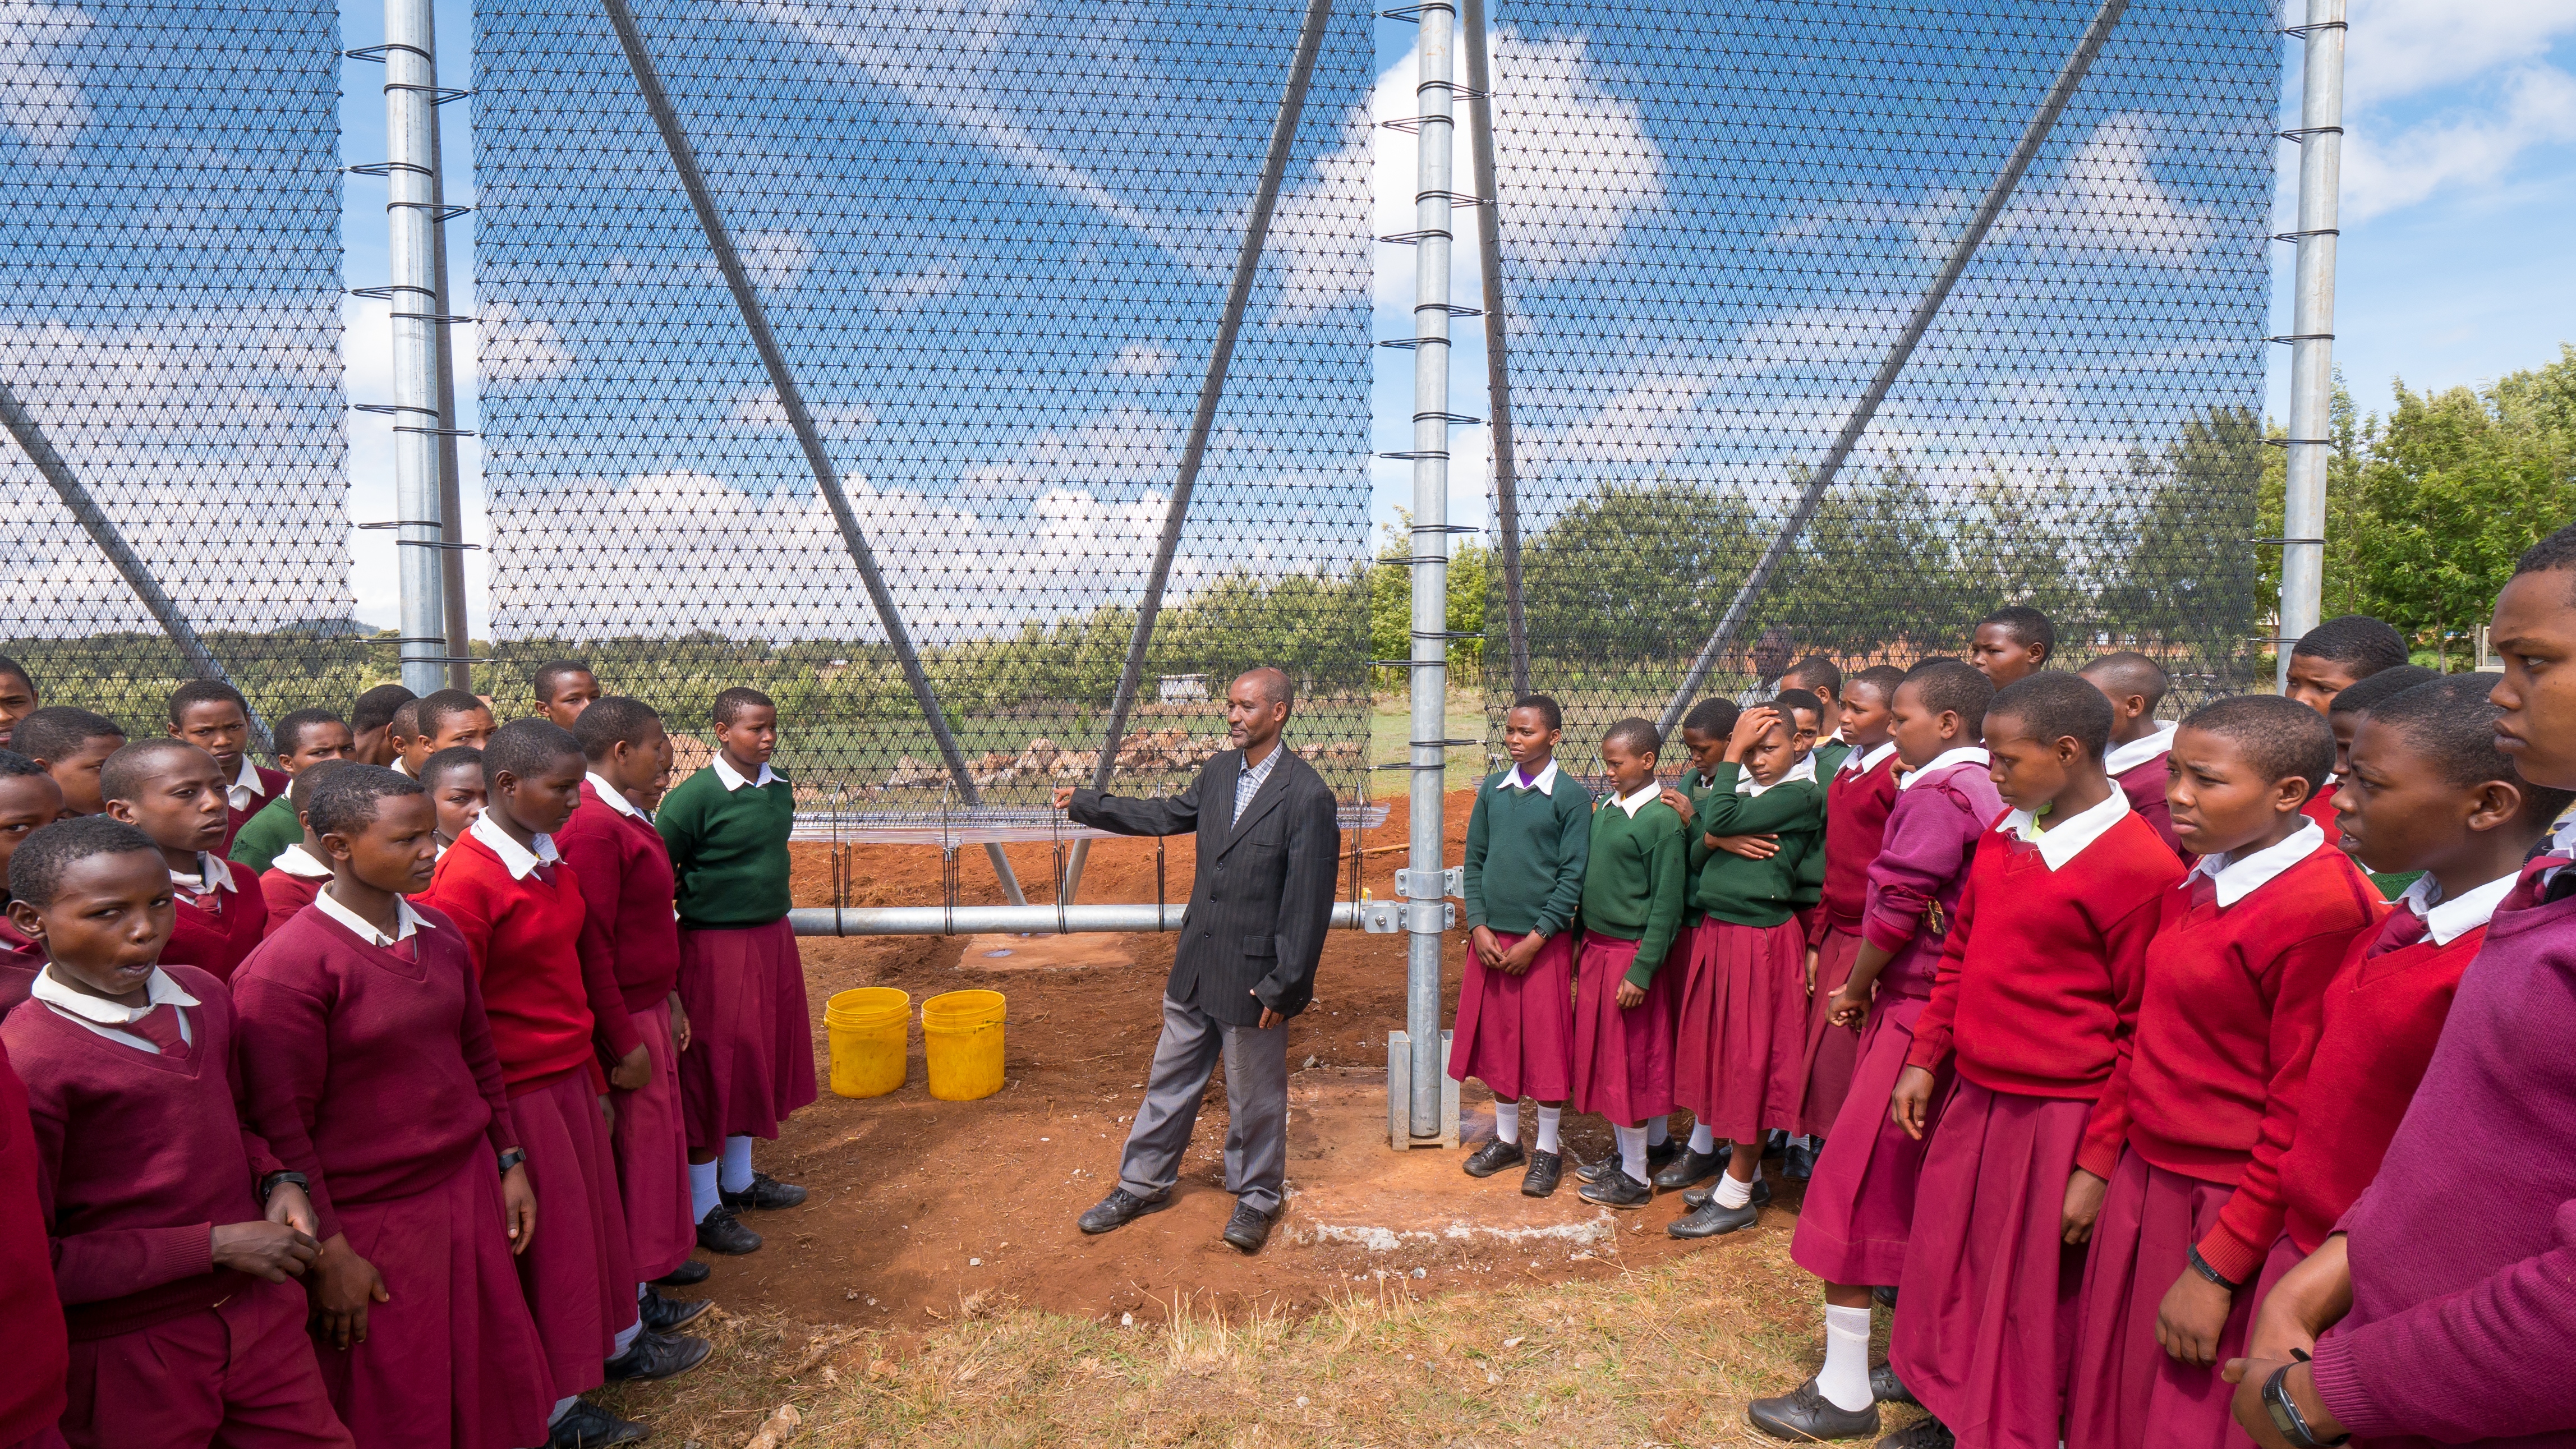 Teams of pupils and teachers will maintain the new nets on their own.